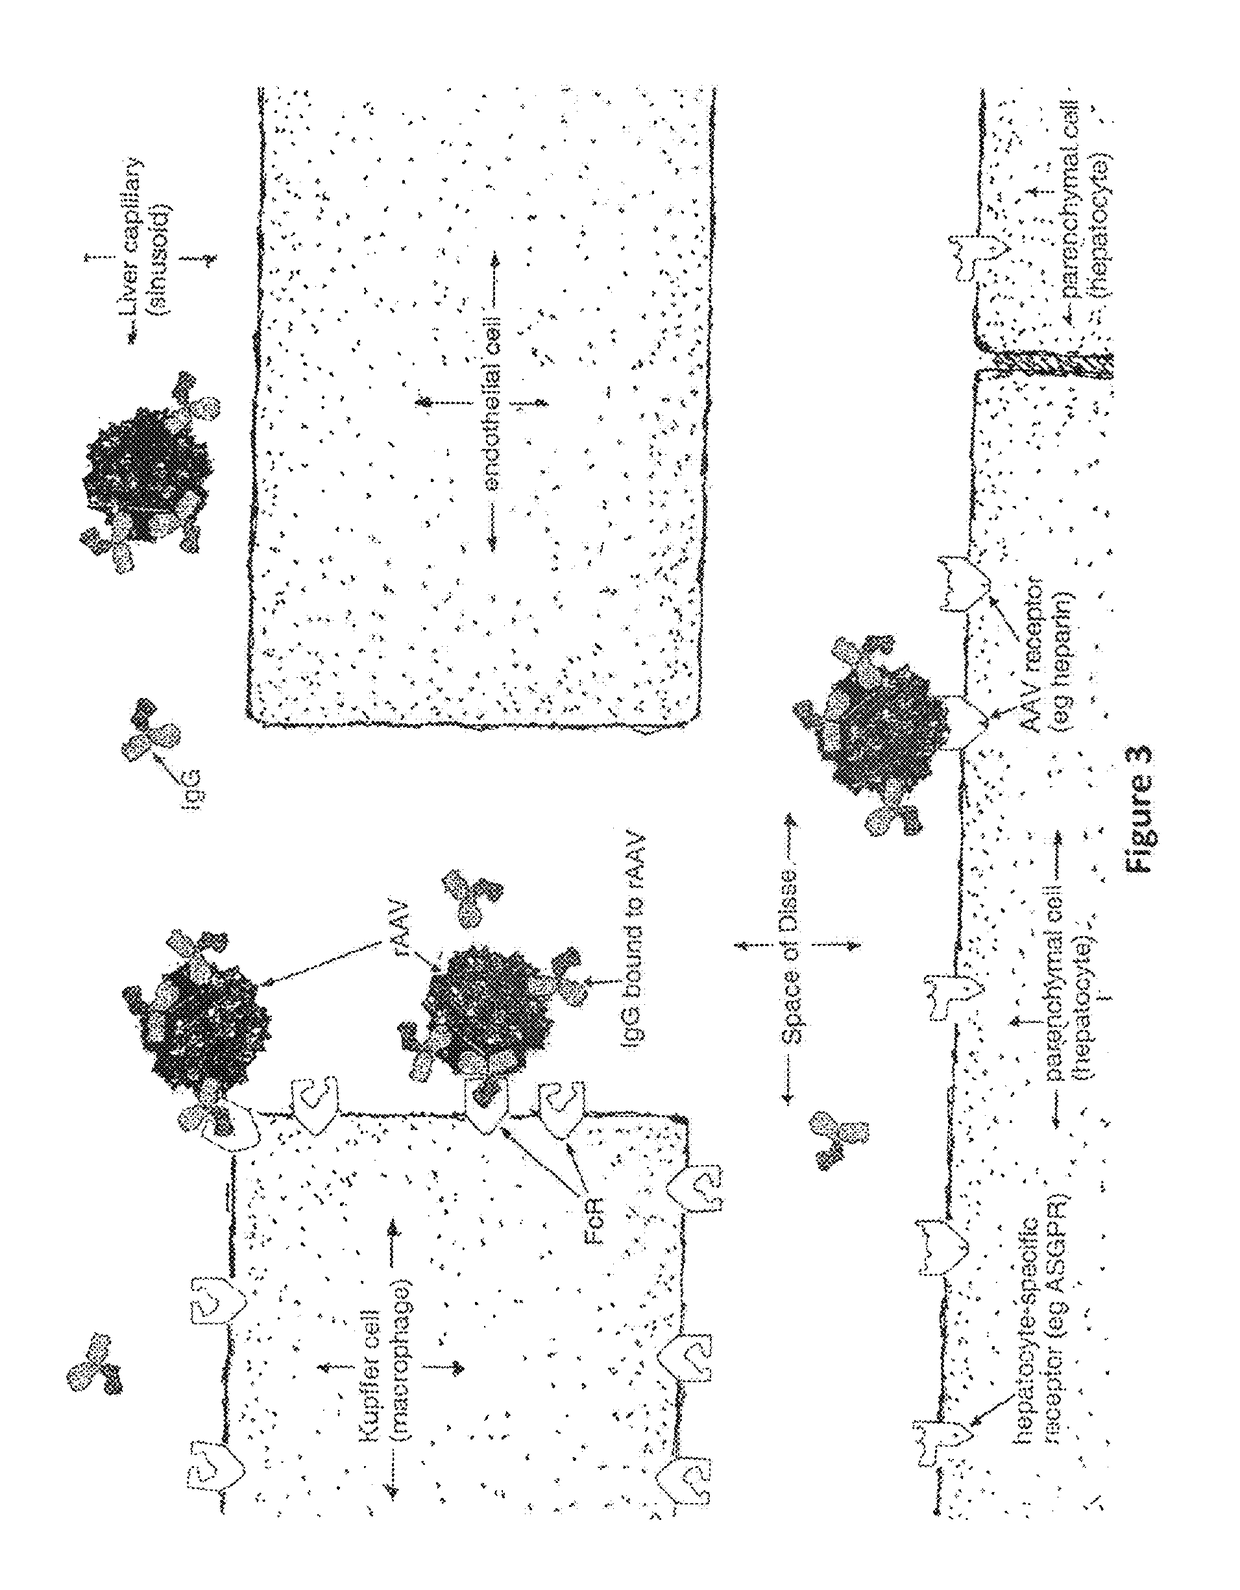 Humanized Viral Vectors and Methods of Use Thereof